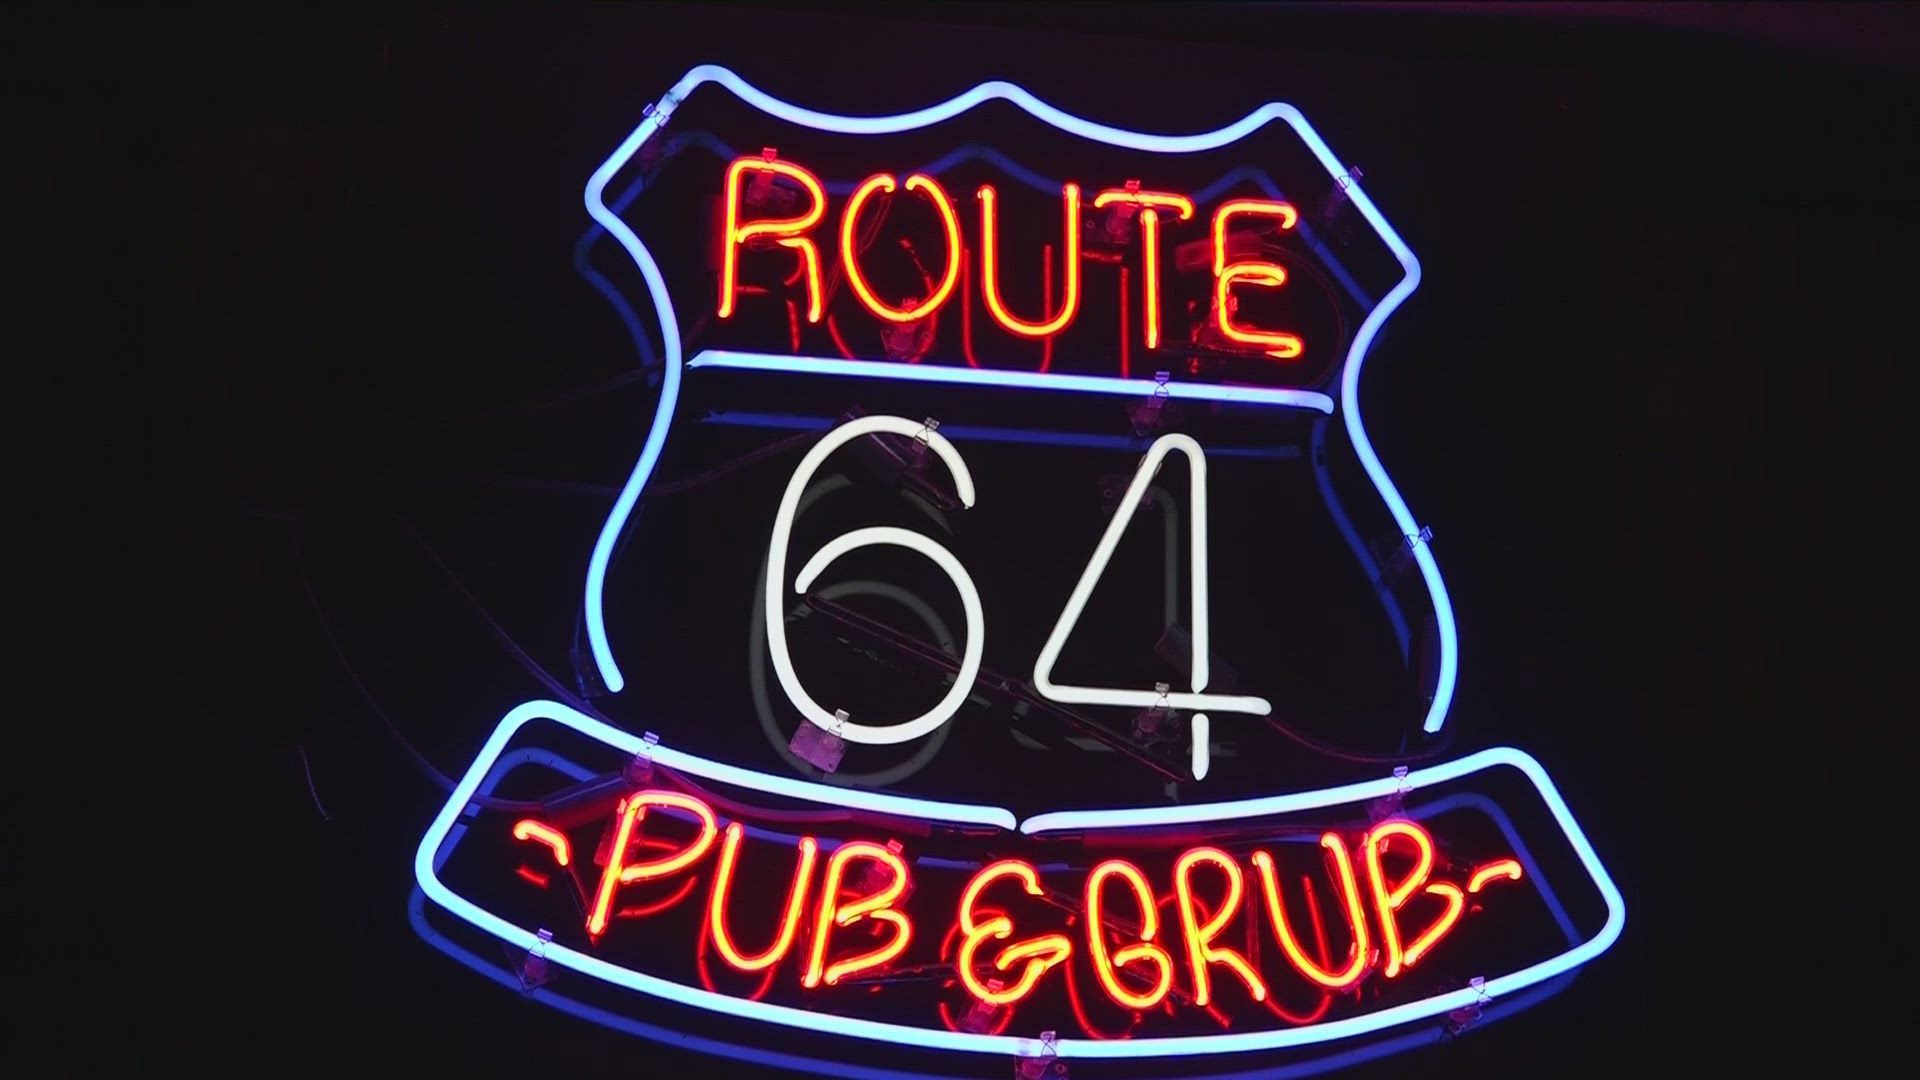 The decision to close Route 64 Pub and Grub wasn't easy, but co-owner Rosemarie Morris said that due to her health, it was necessary.